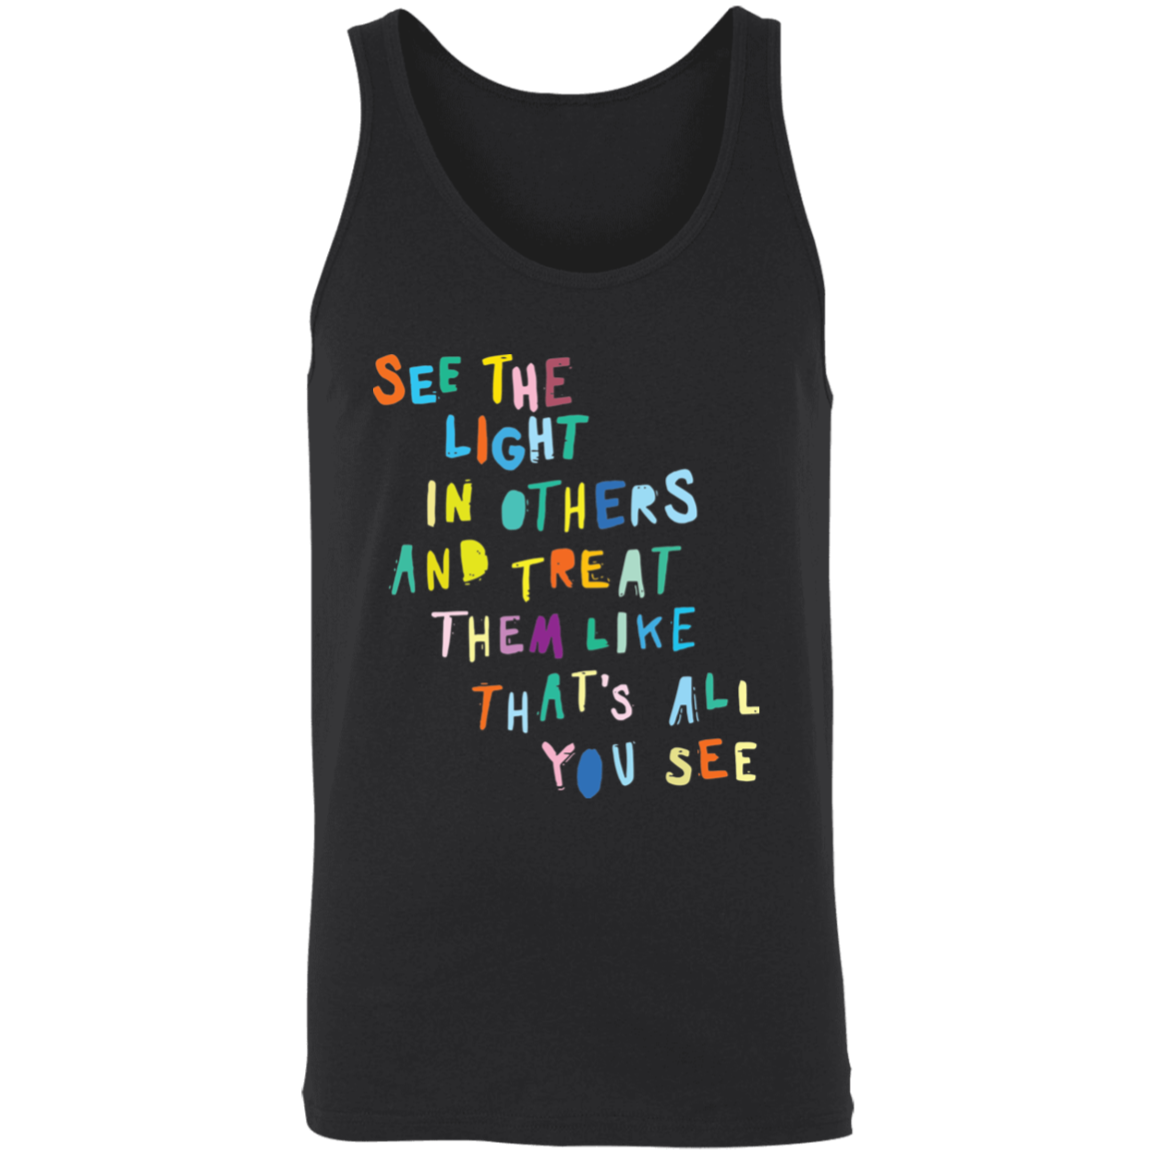 See the light in others and treat tank top